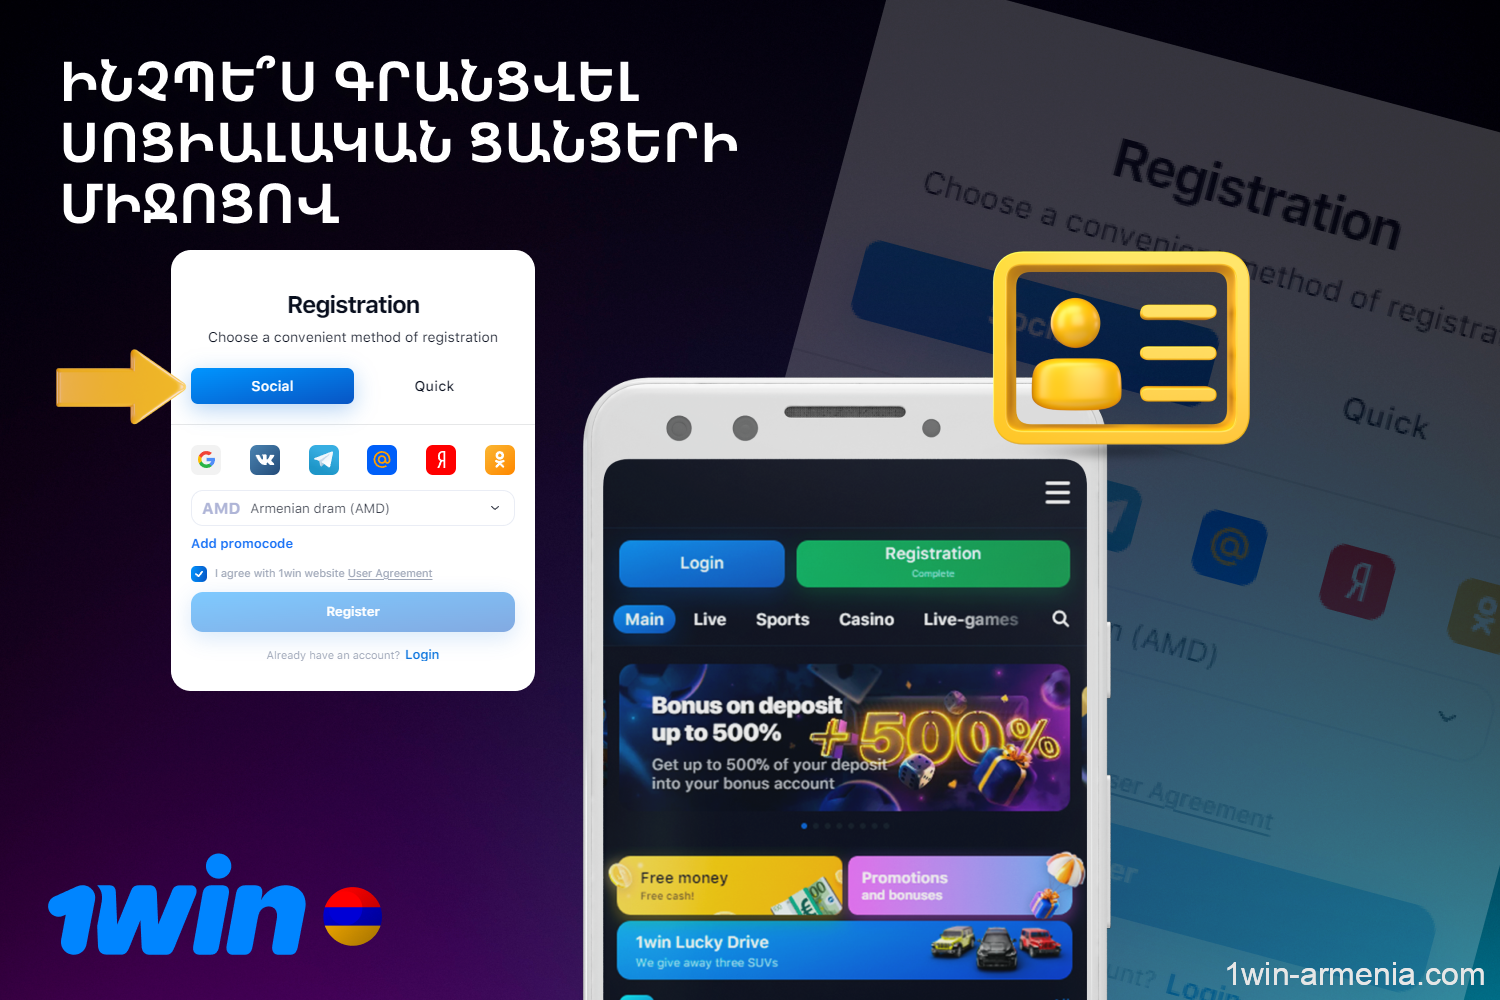 Armenian users can create a 1win account using their existing social network credentials